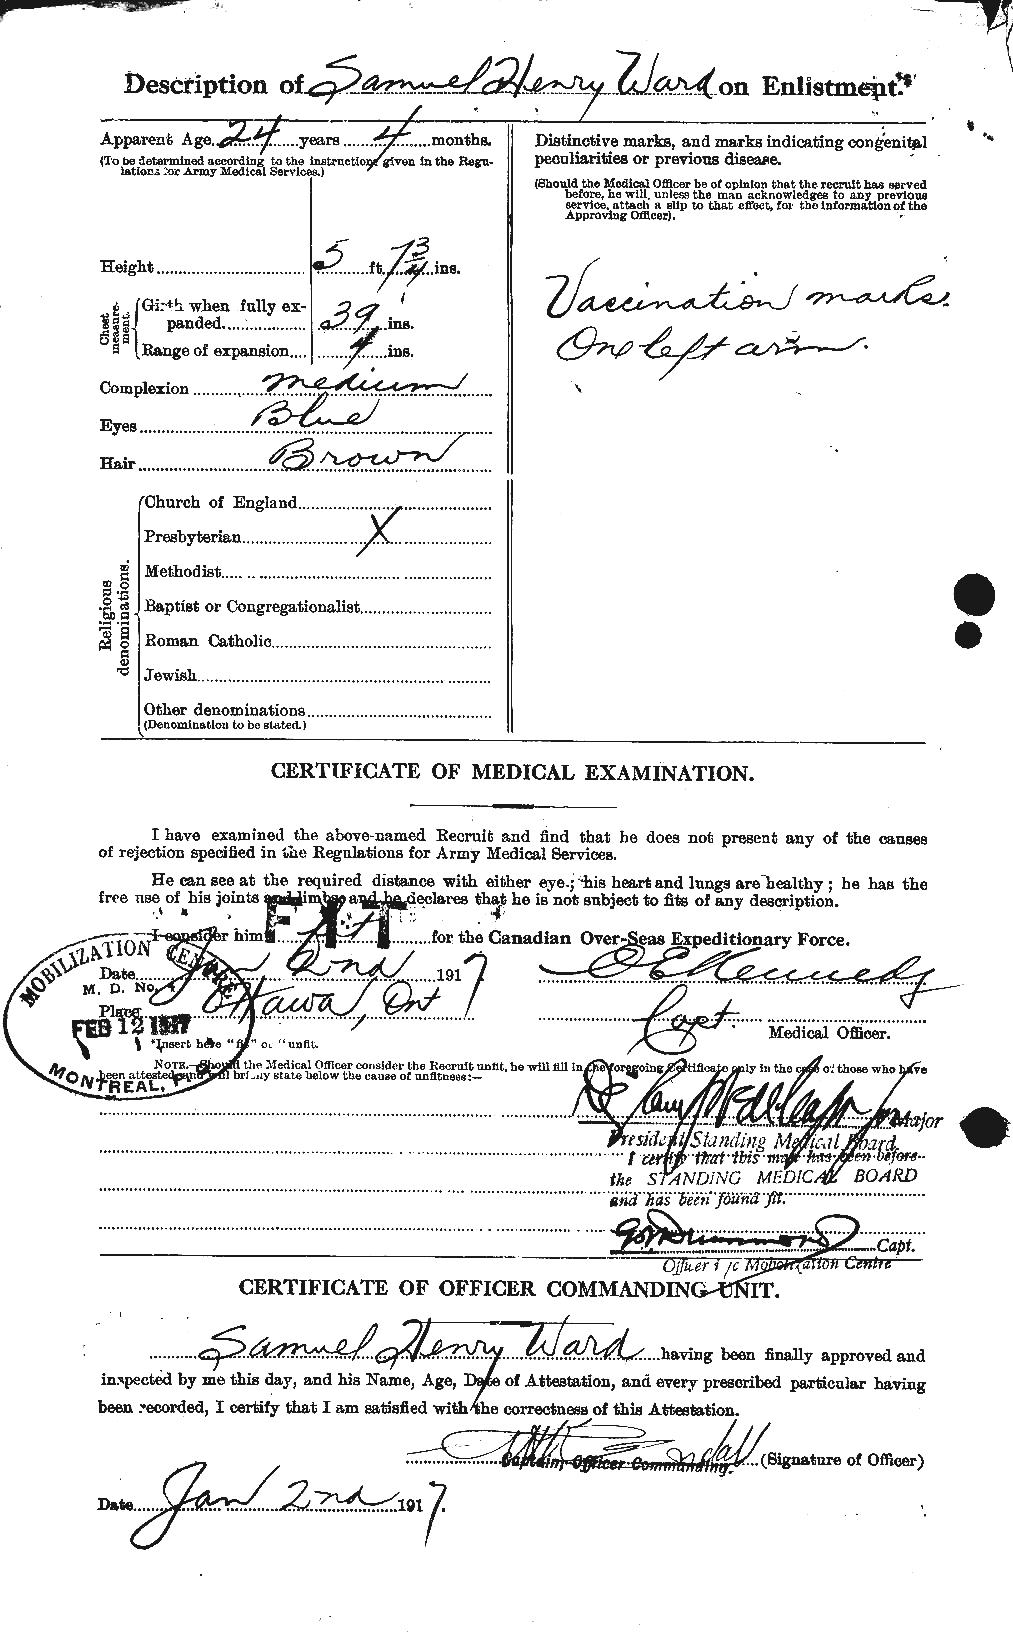 Personnel Records of the First World War - CEF 659683b